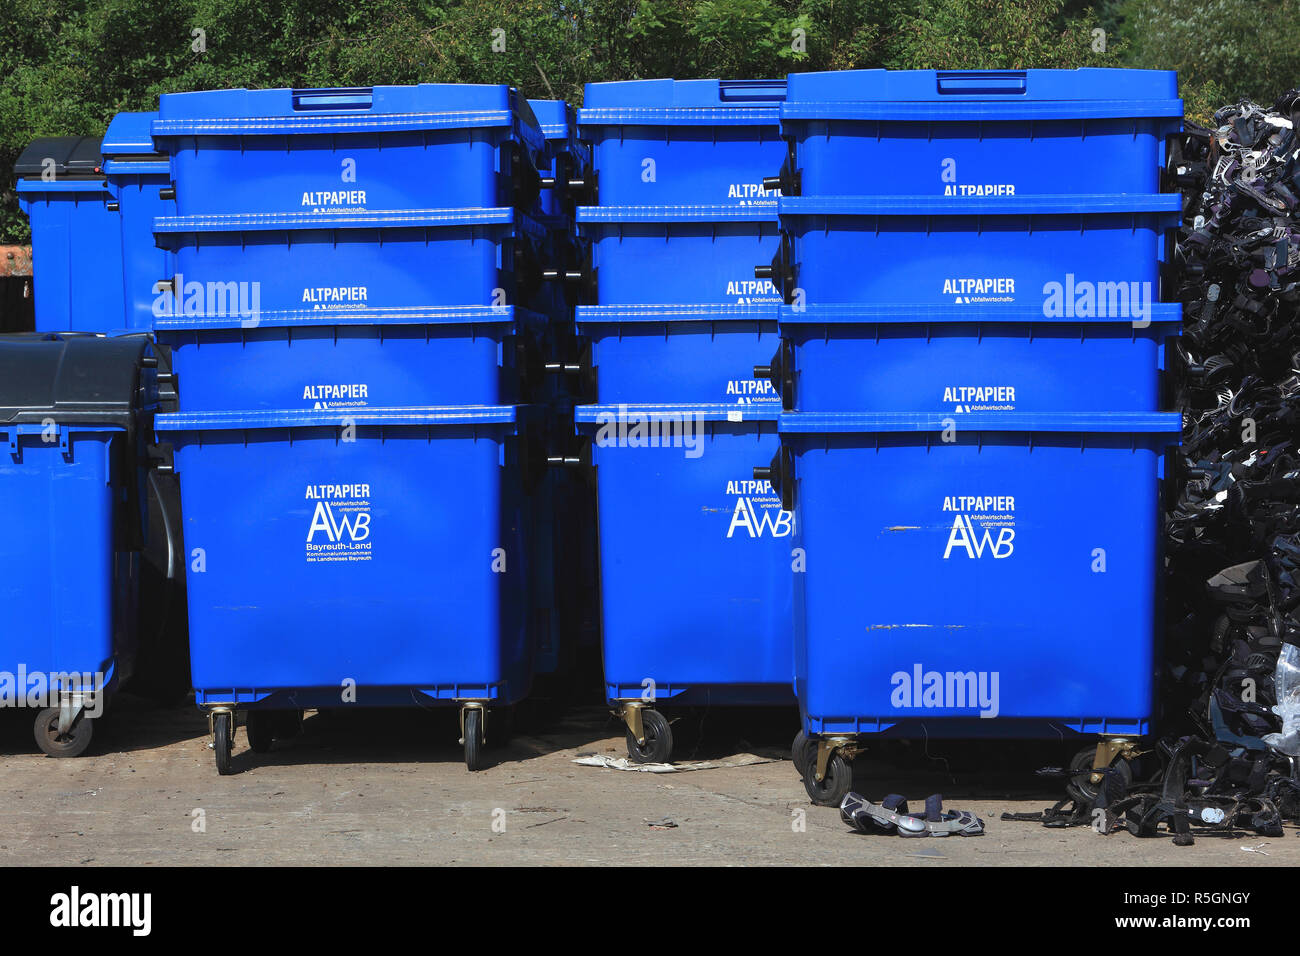 Collecting bin, collecting container for waste paper, Germany Stock Photo